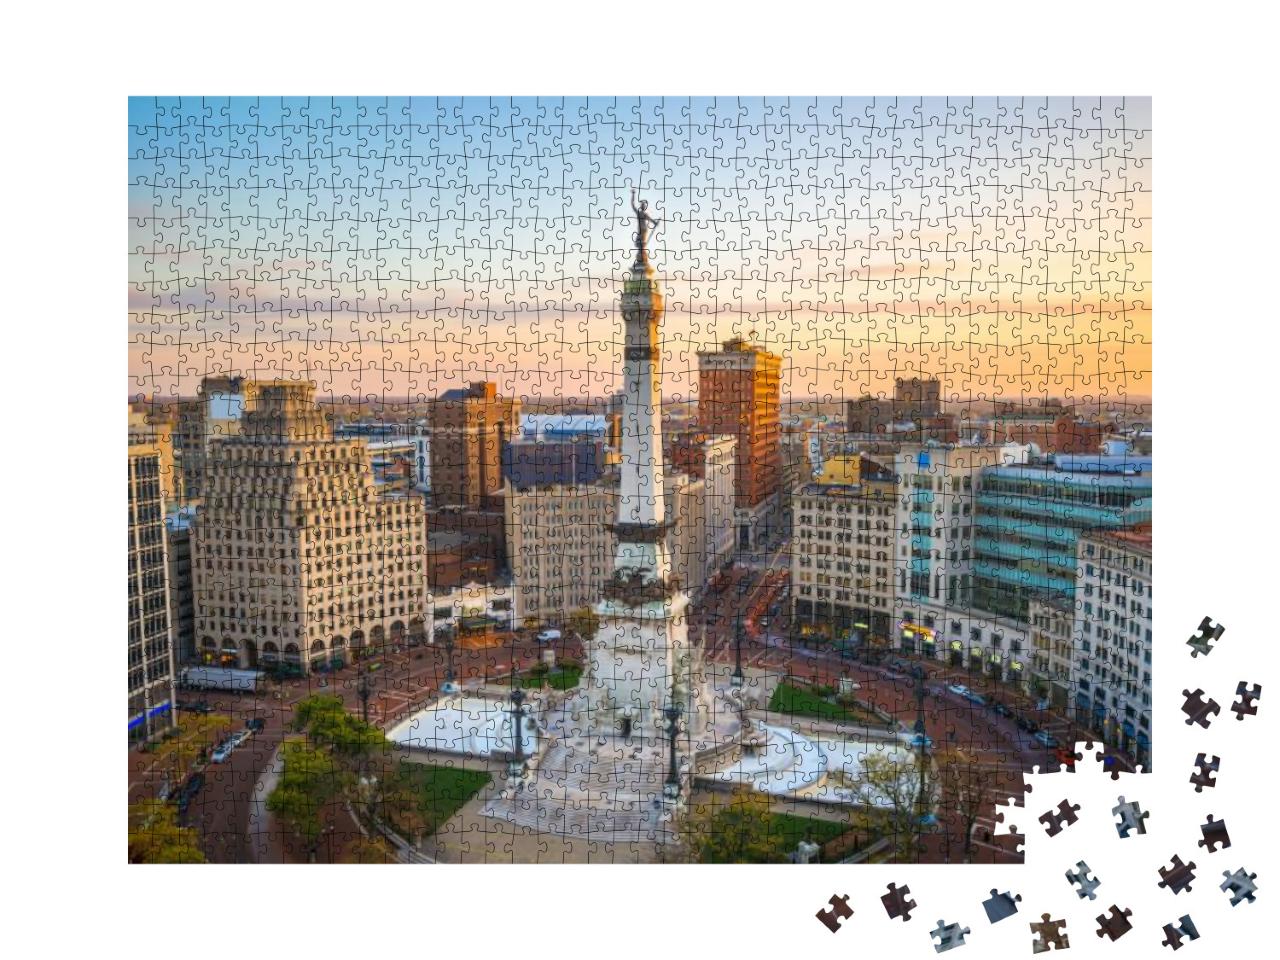 Indianapolis, Indiana, USA Skyline Over Monument Circle At... Jigsaw Puzzle with 1000 pieces